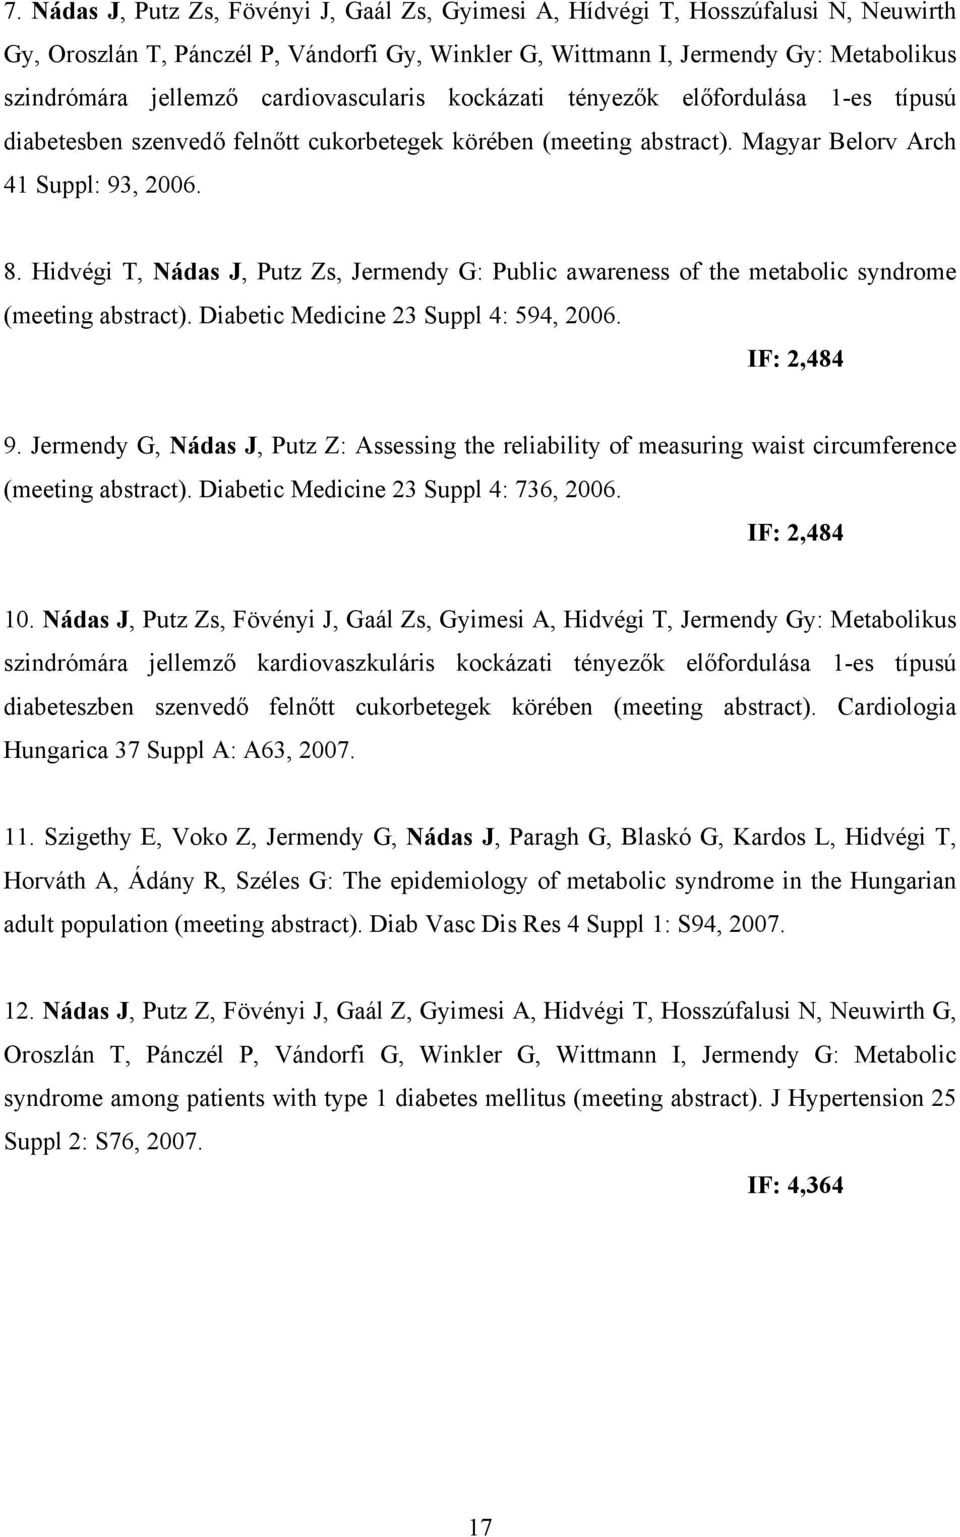 Hidvégi T, Nádas J, Putz Zs, Jermendy G: Public awareness of the metabolic syndrome (meeting abstract). Diabetic Medicine 23 Suppl 4: 594, 2006. IF: 2,484 9.